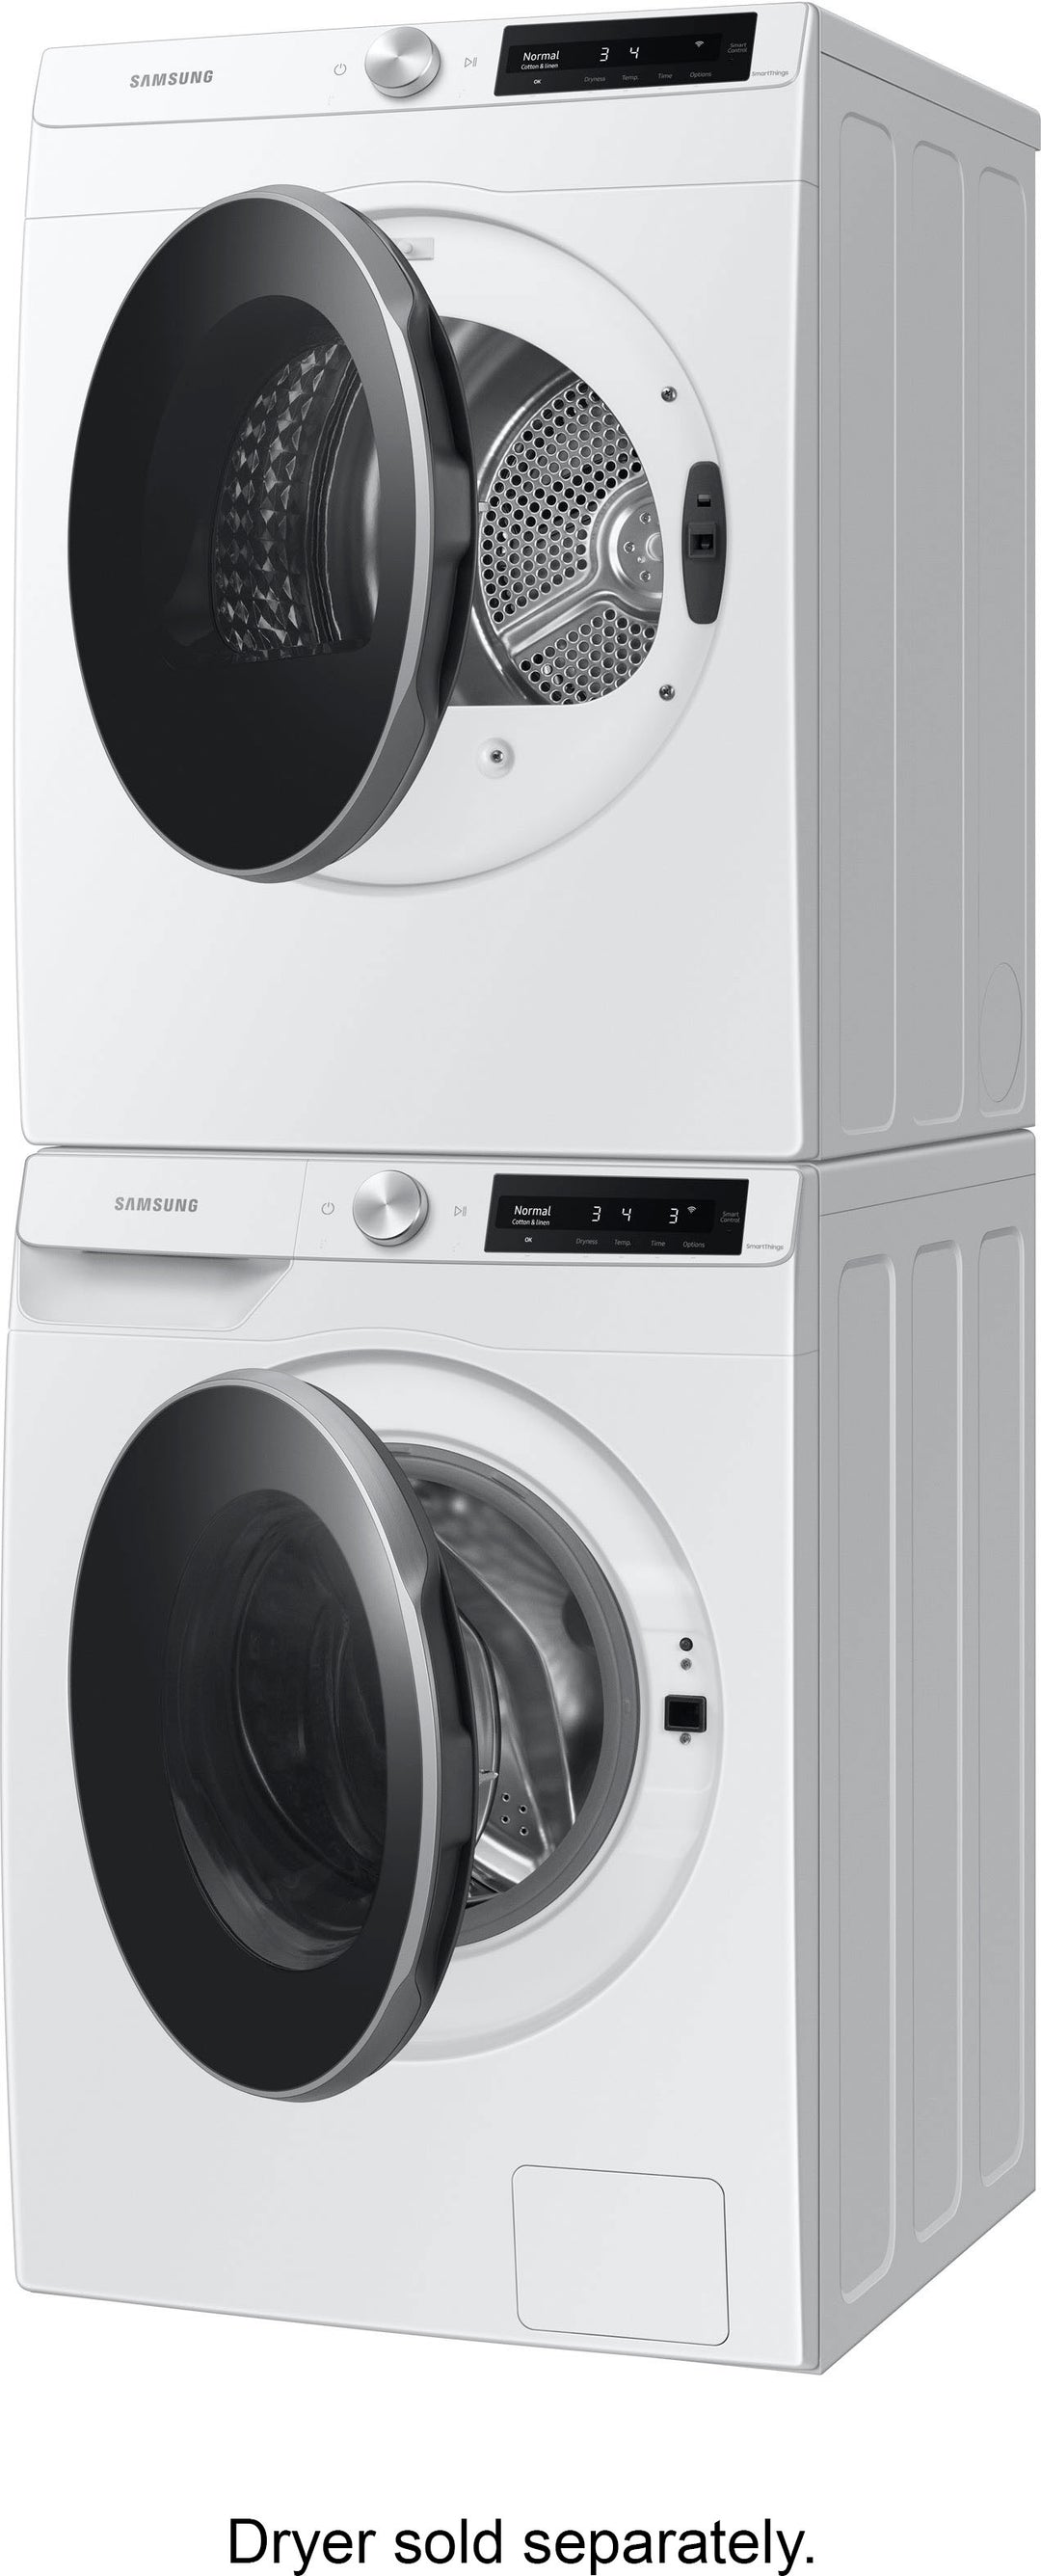 Samsung - 2.5 cu. ft. Compact Front Load Washer with AI Smart Dial and Super Speed Wash - White_4